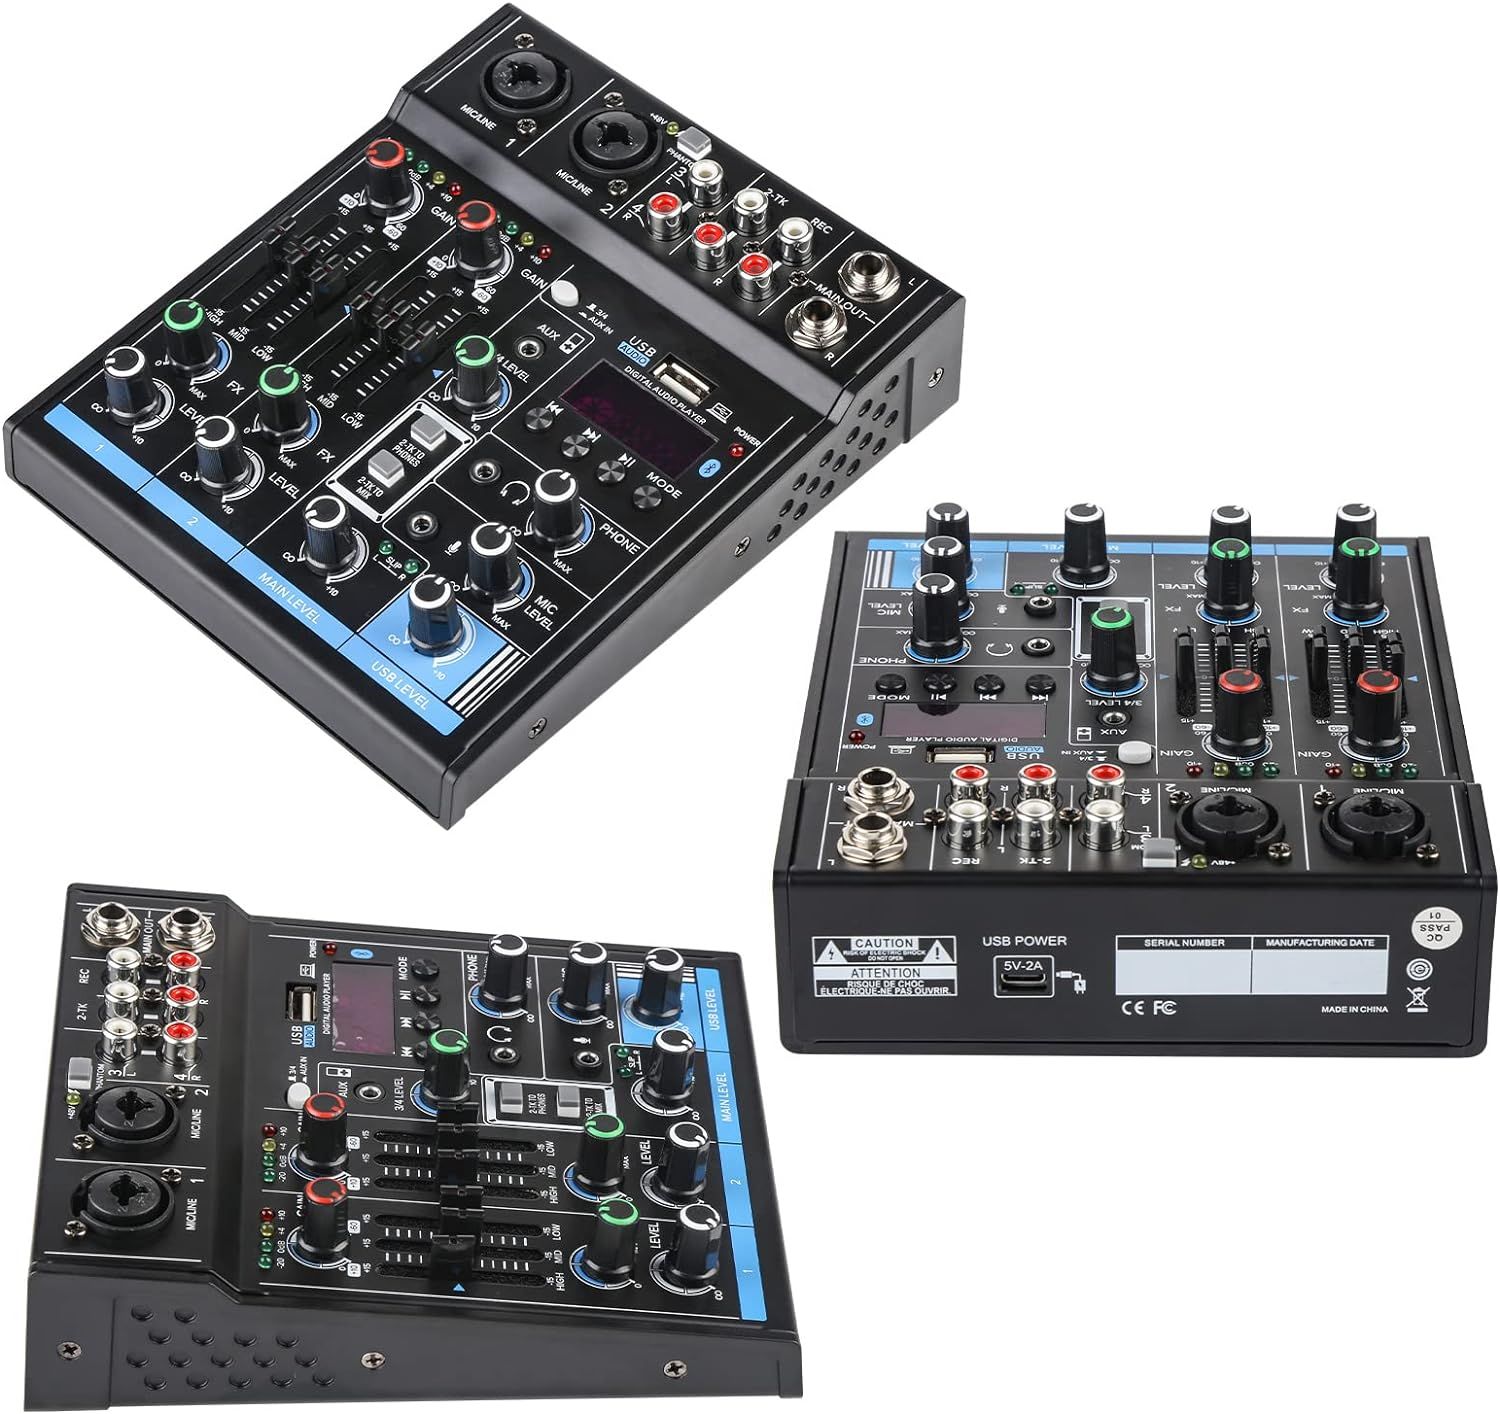 Channel,　Mixer　Mixer　for　Channel,　DJ　With　Mixing　Console　Board　Streaming.　Audio　Sounds　Mixer　Usb